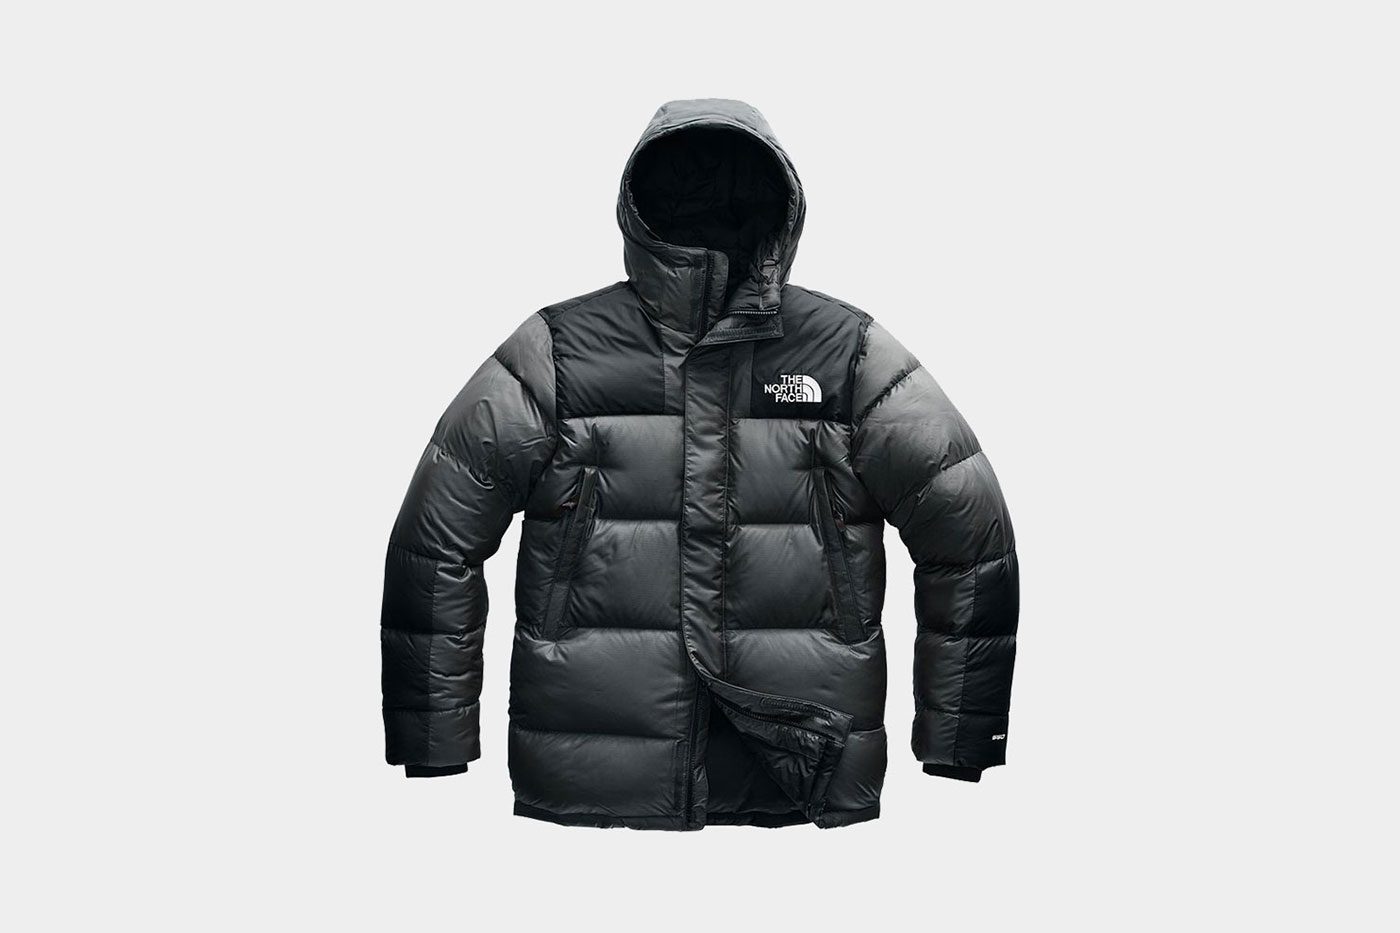 The North Face Down Jacket Deals, 50% OFF | empow-her.com